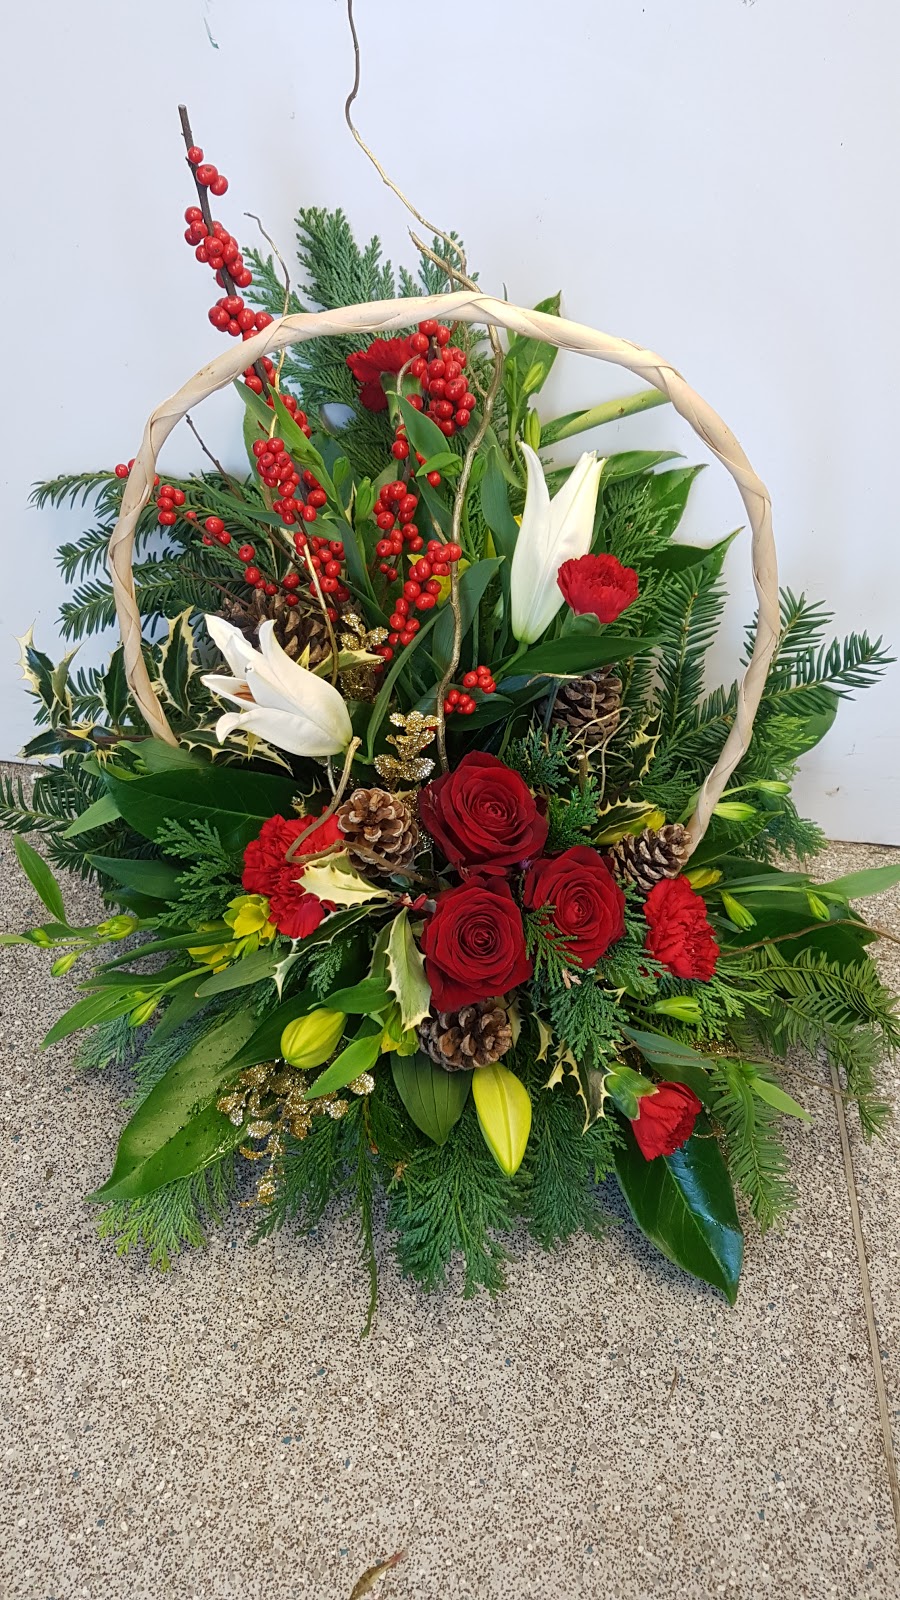 Katies Floral Creations 0151 630 1292 Trusted Florist In Wallasey